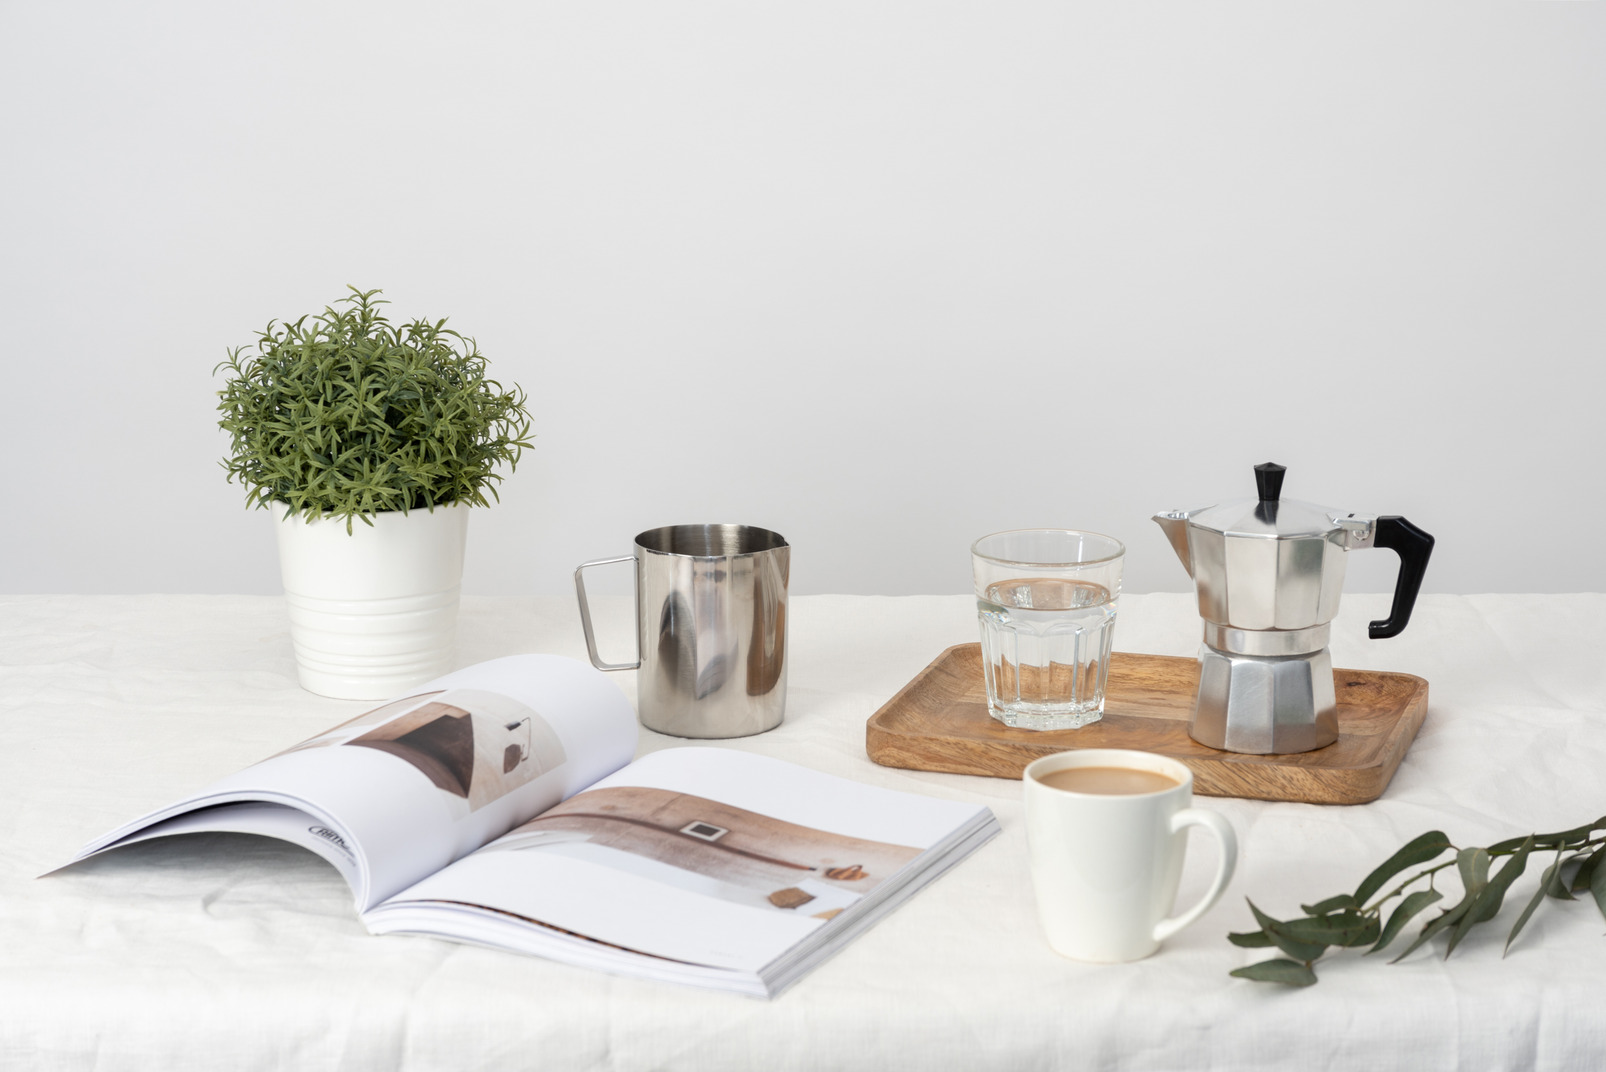 Moka and glass of water on the wooden tray, plant in pot, magazine, large cup of milk coffee and pitcher